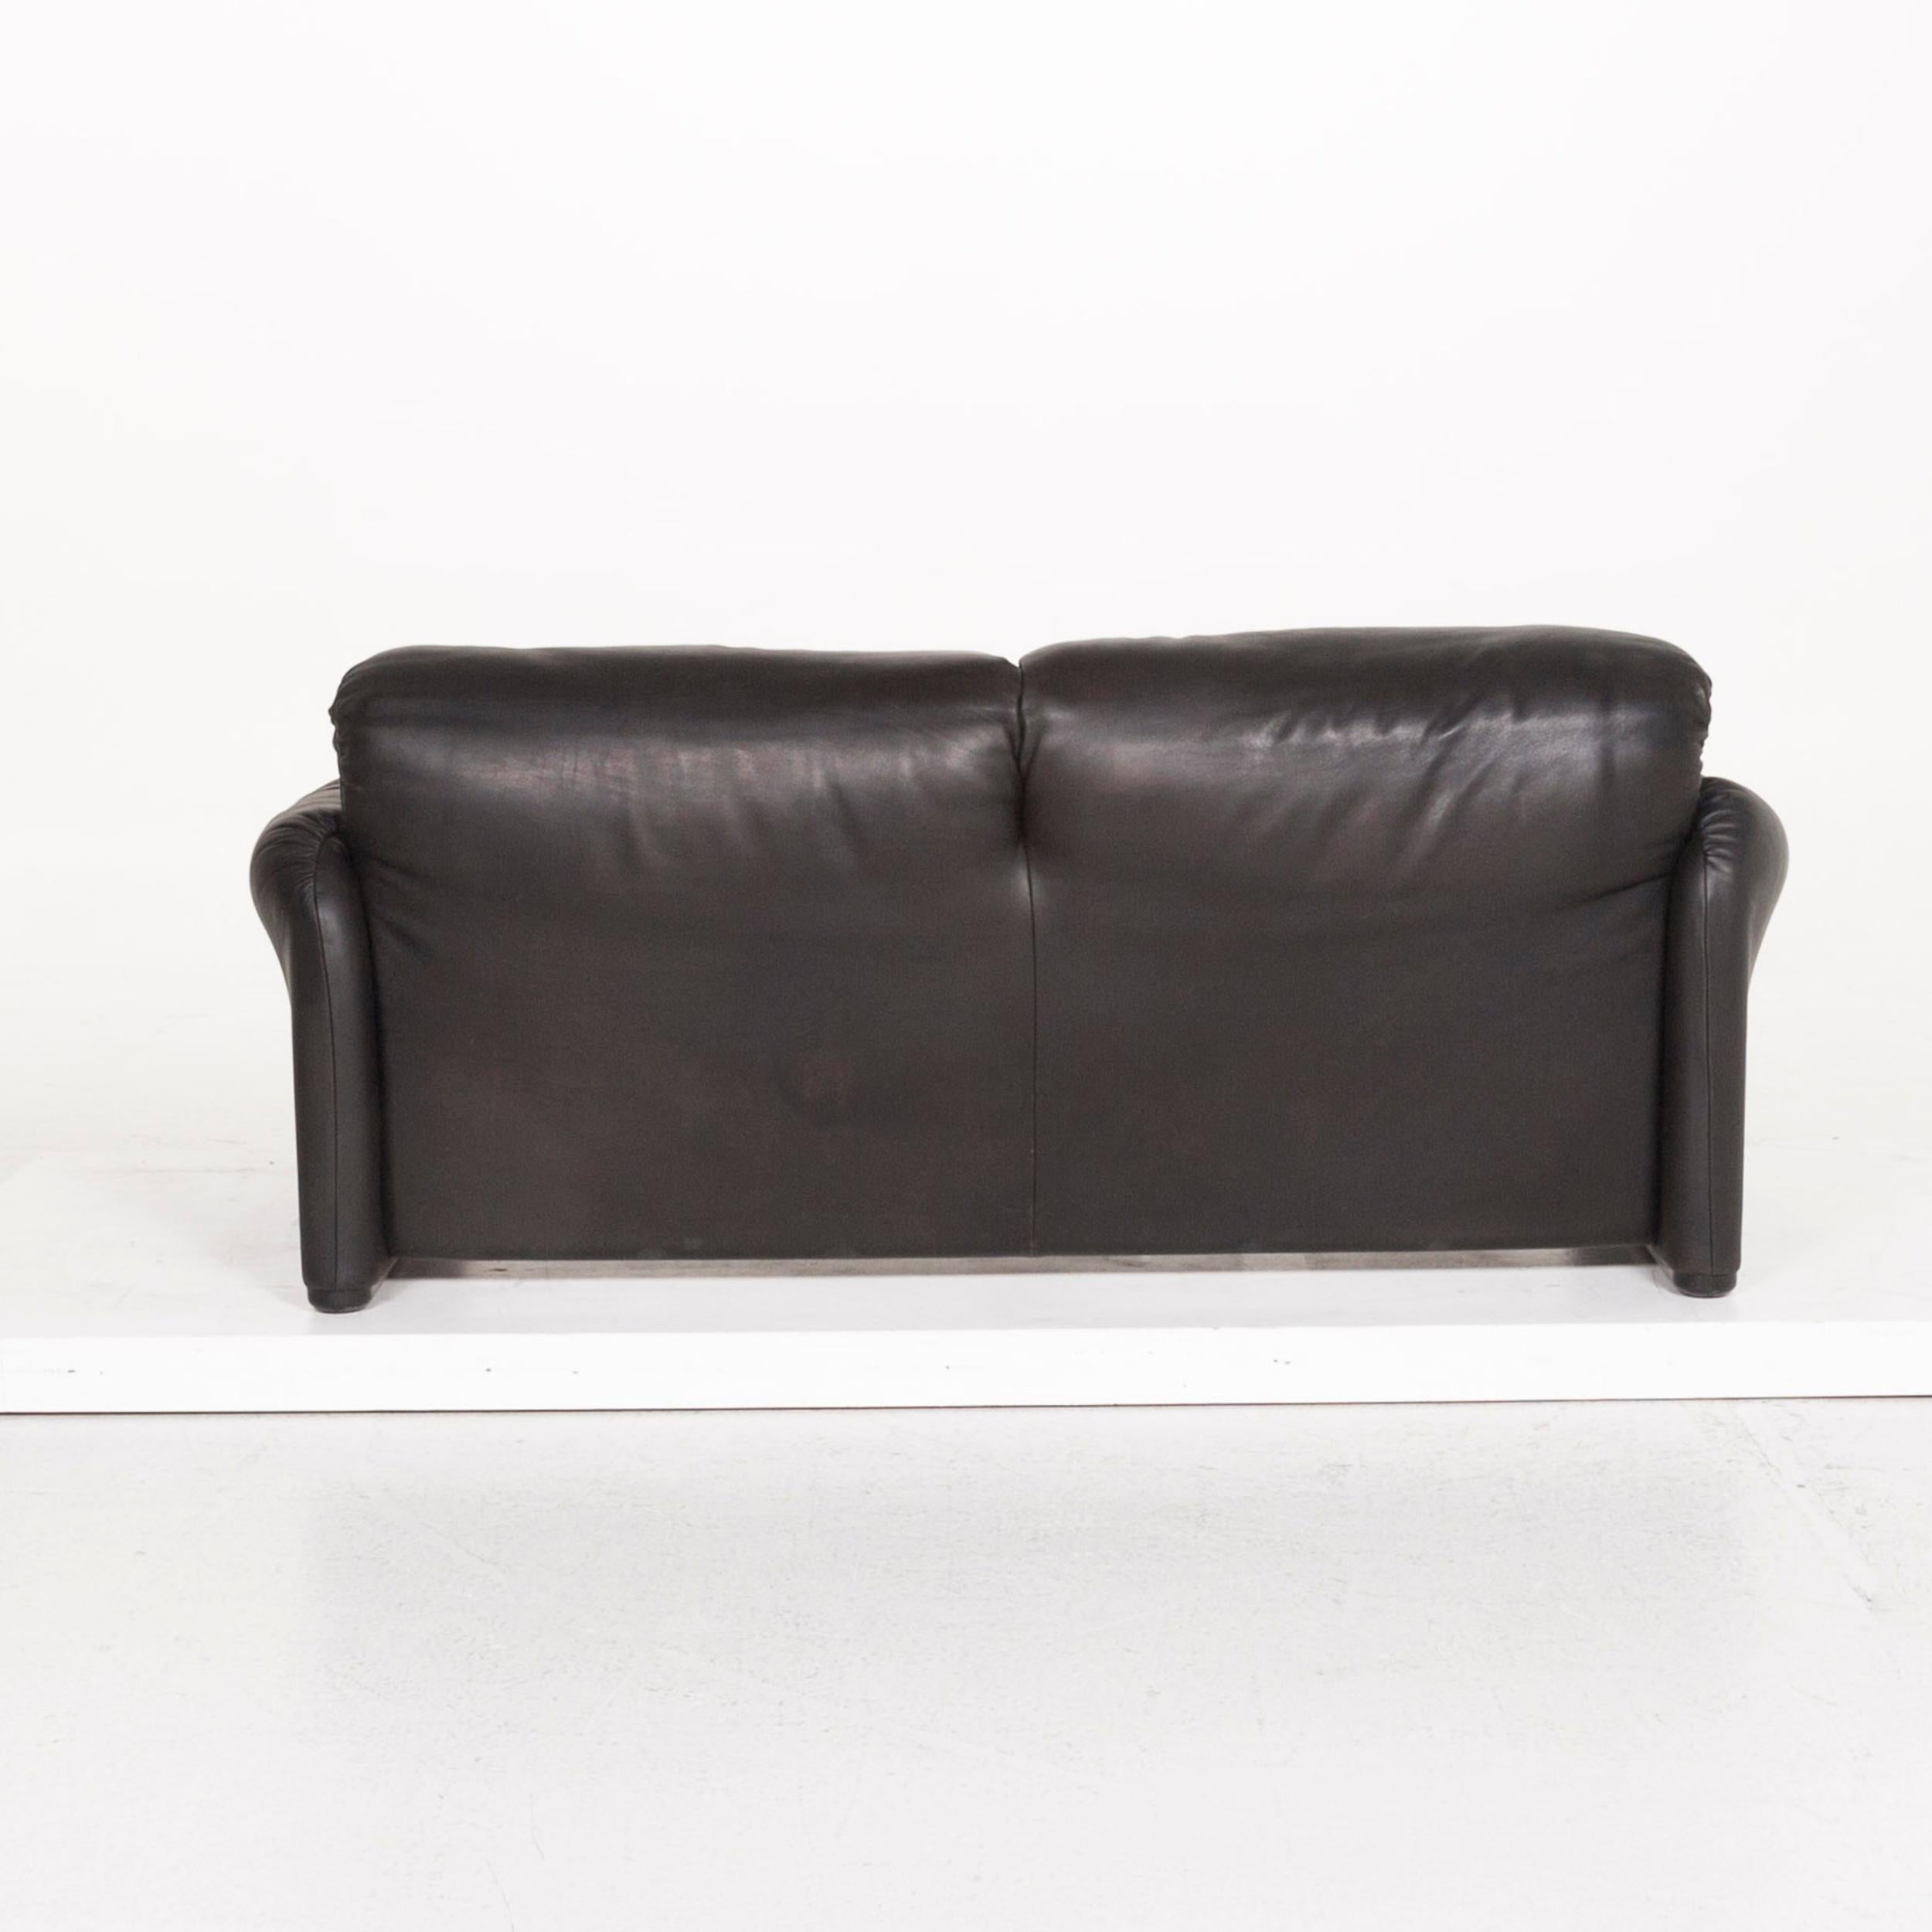 Cassina Maralunga Leather Sofa Black Two-Seat Function Couch 2